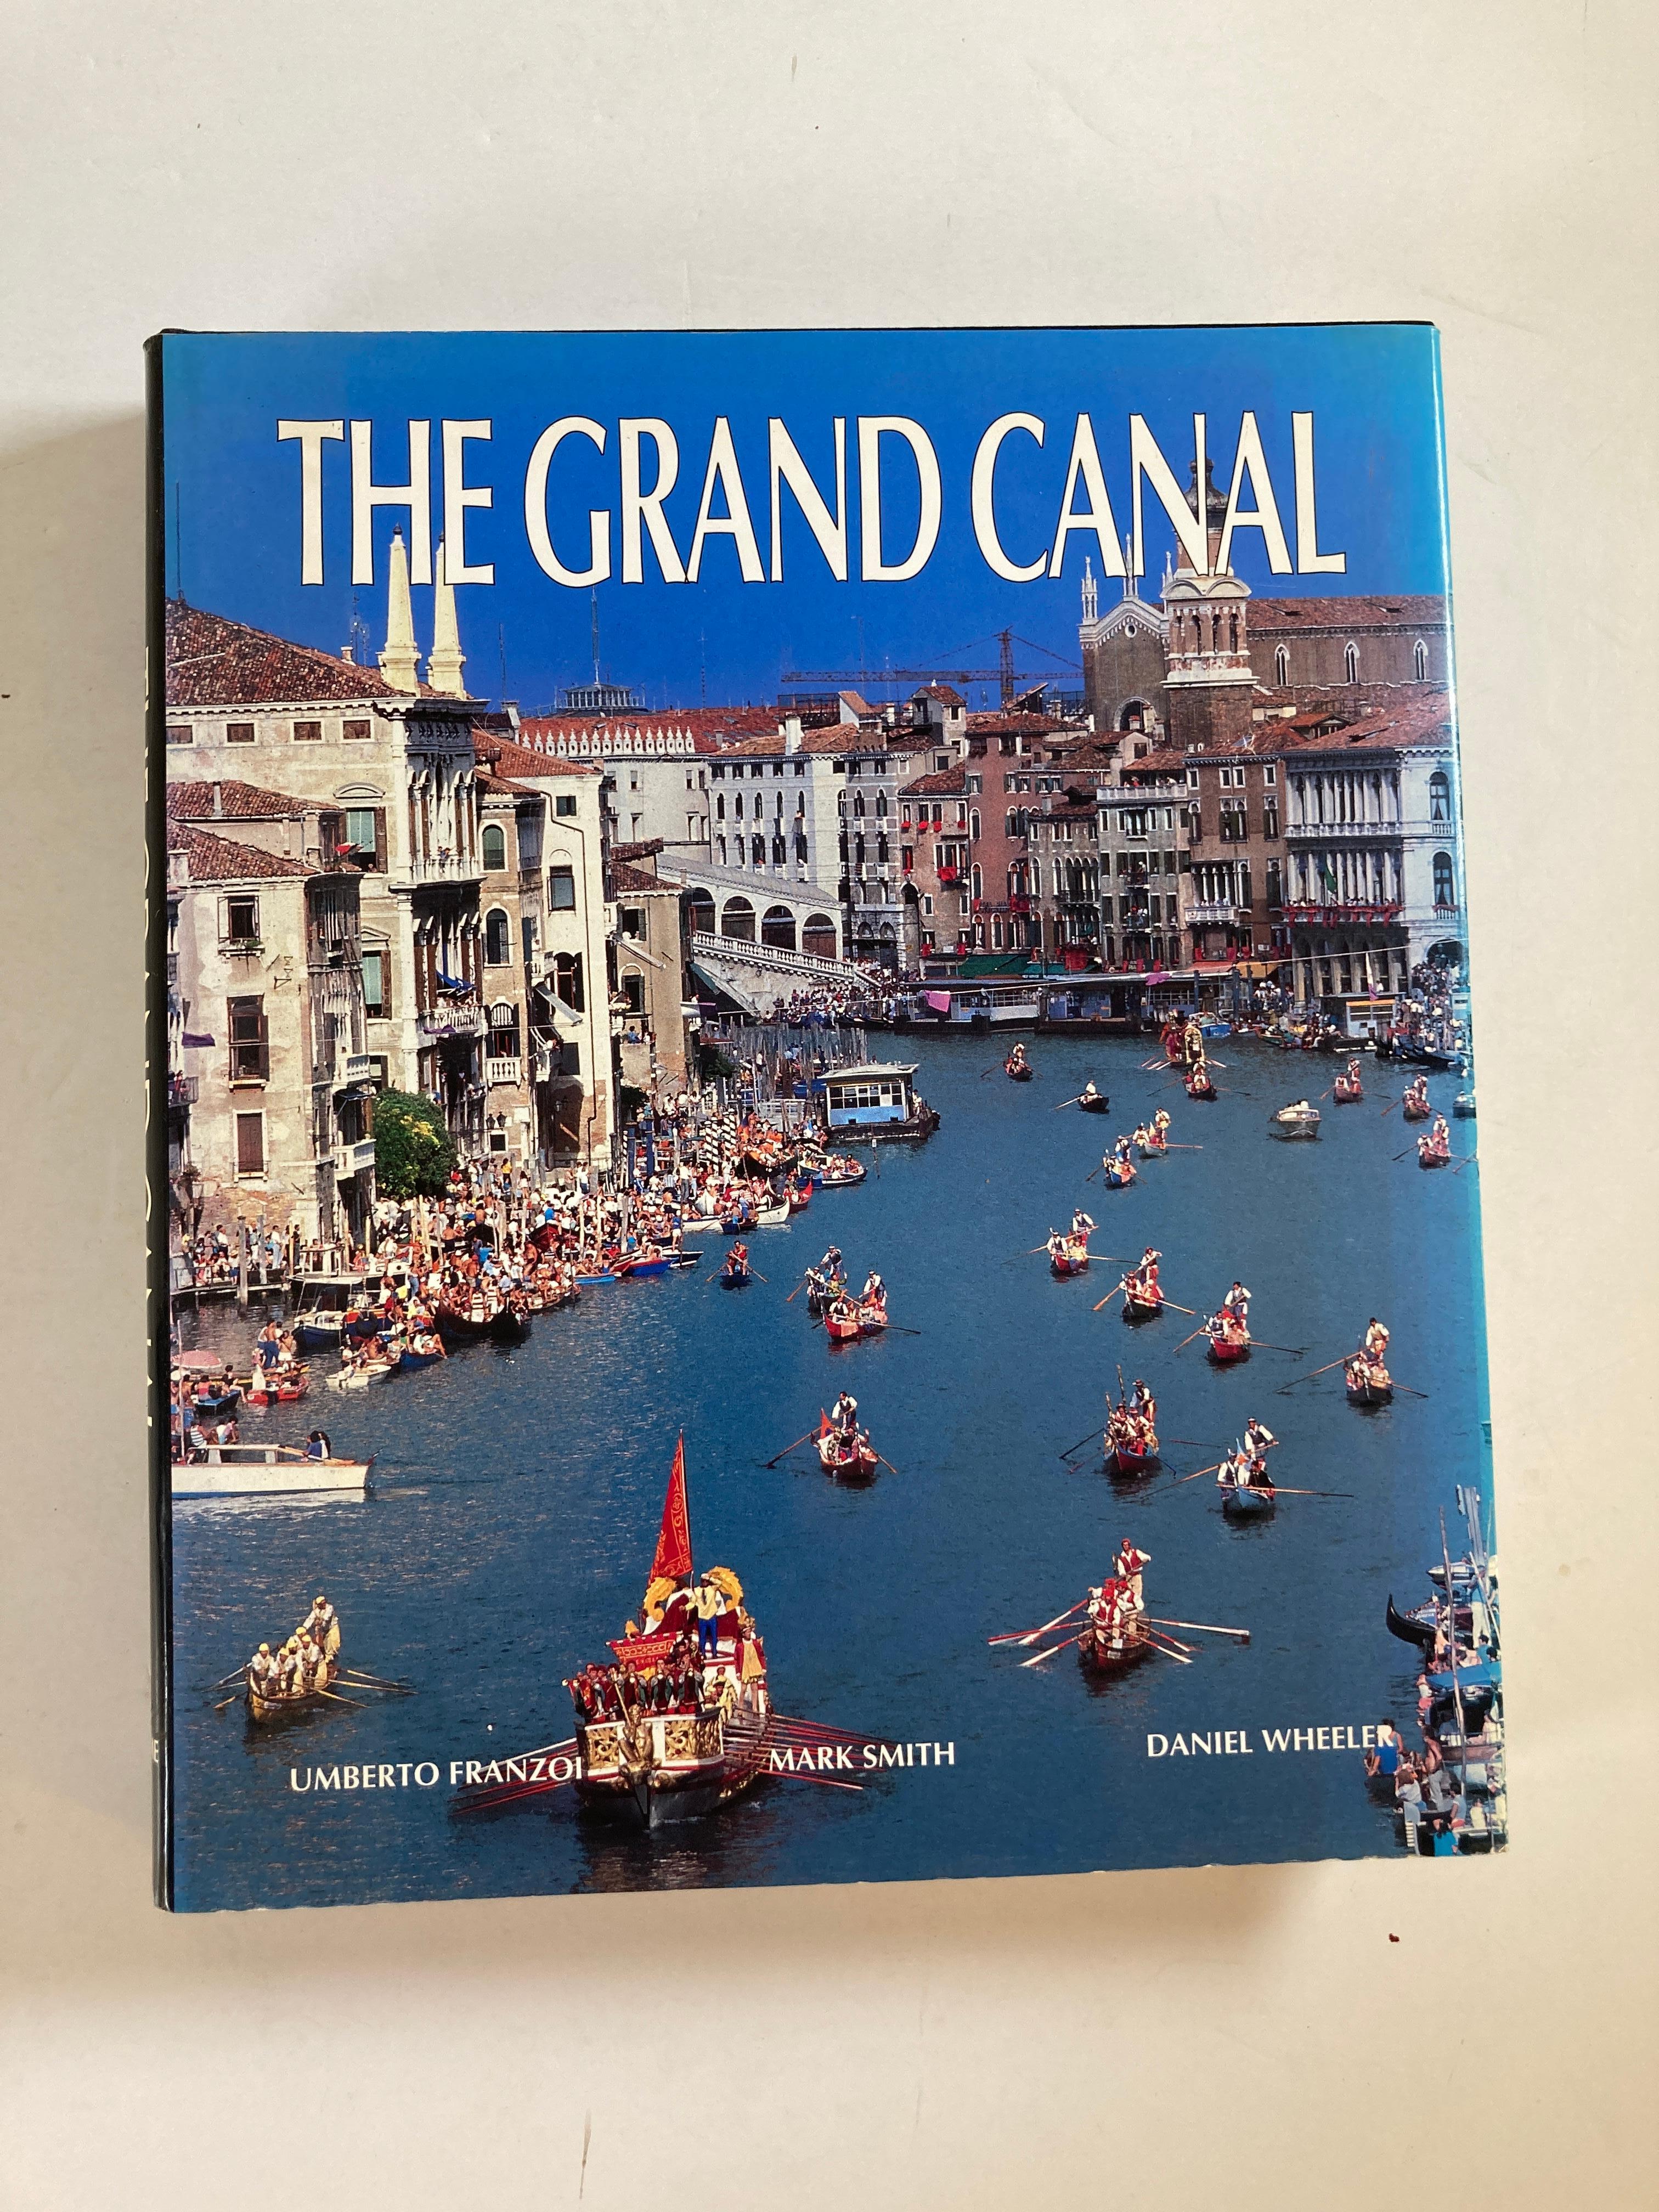 The Grand Canal, published by the Vendome Press in 1993, written by Umberto Franzoi, detailing a comprehensive history of the Grand Canal and every significant building along it featuring over 200 color images in 1993.
The Grand Canal reproduces